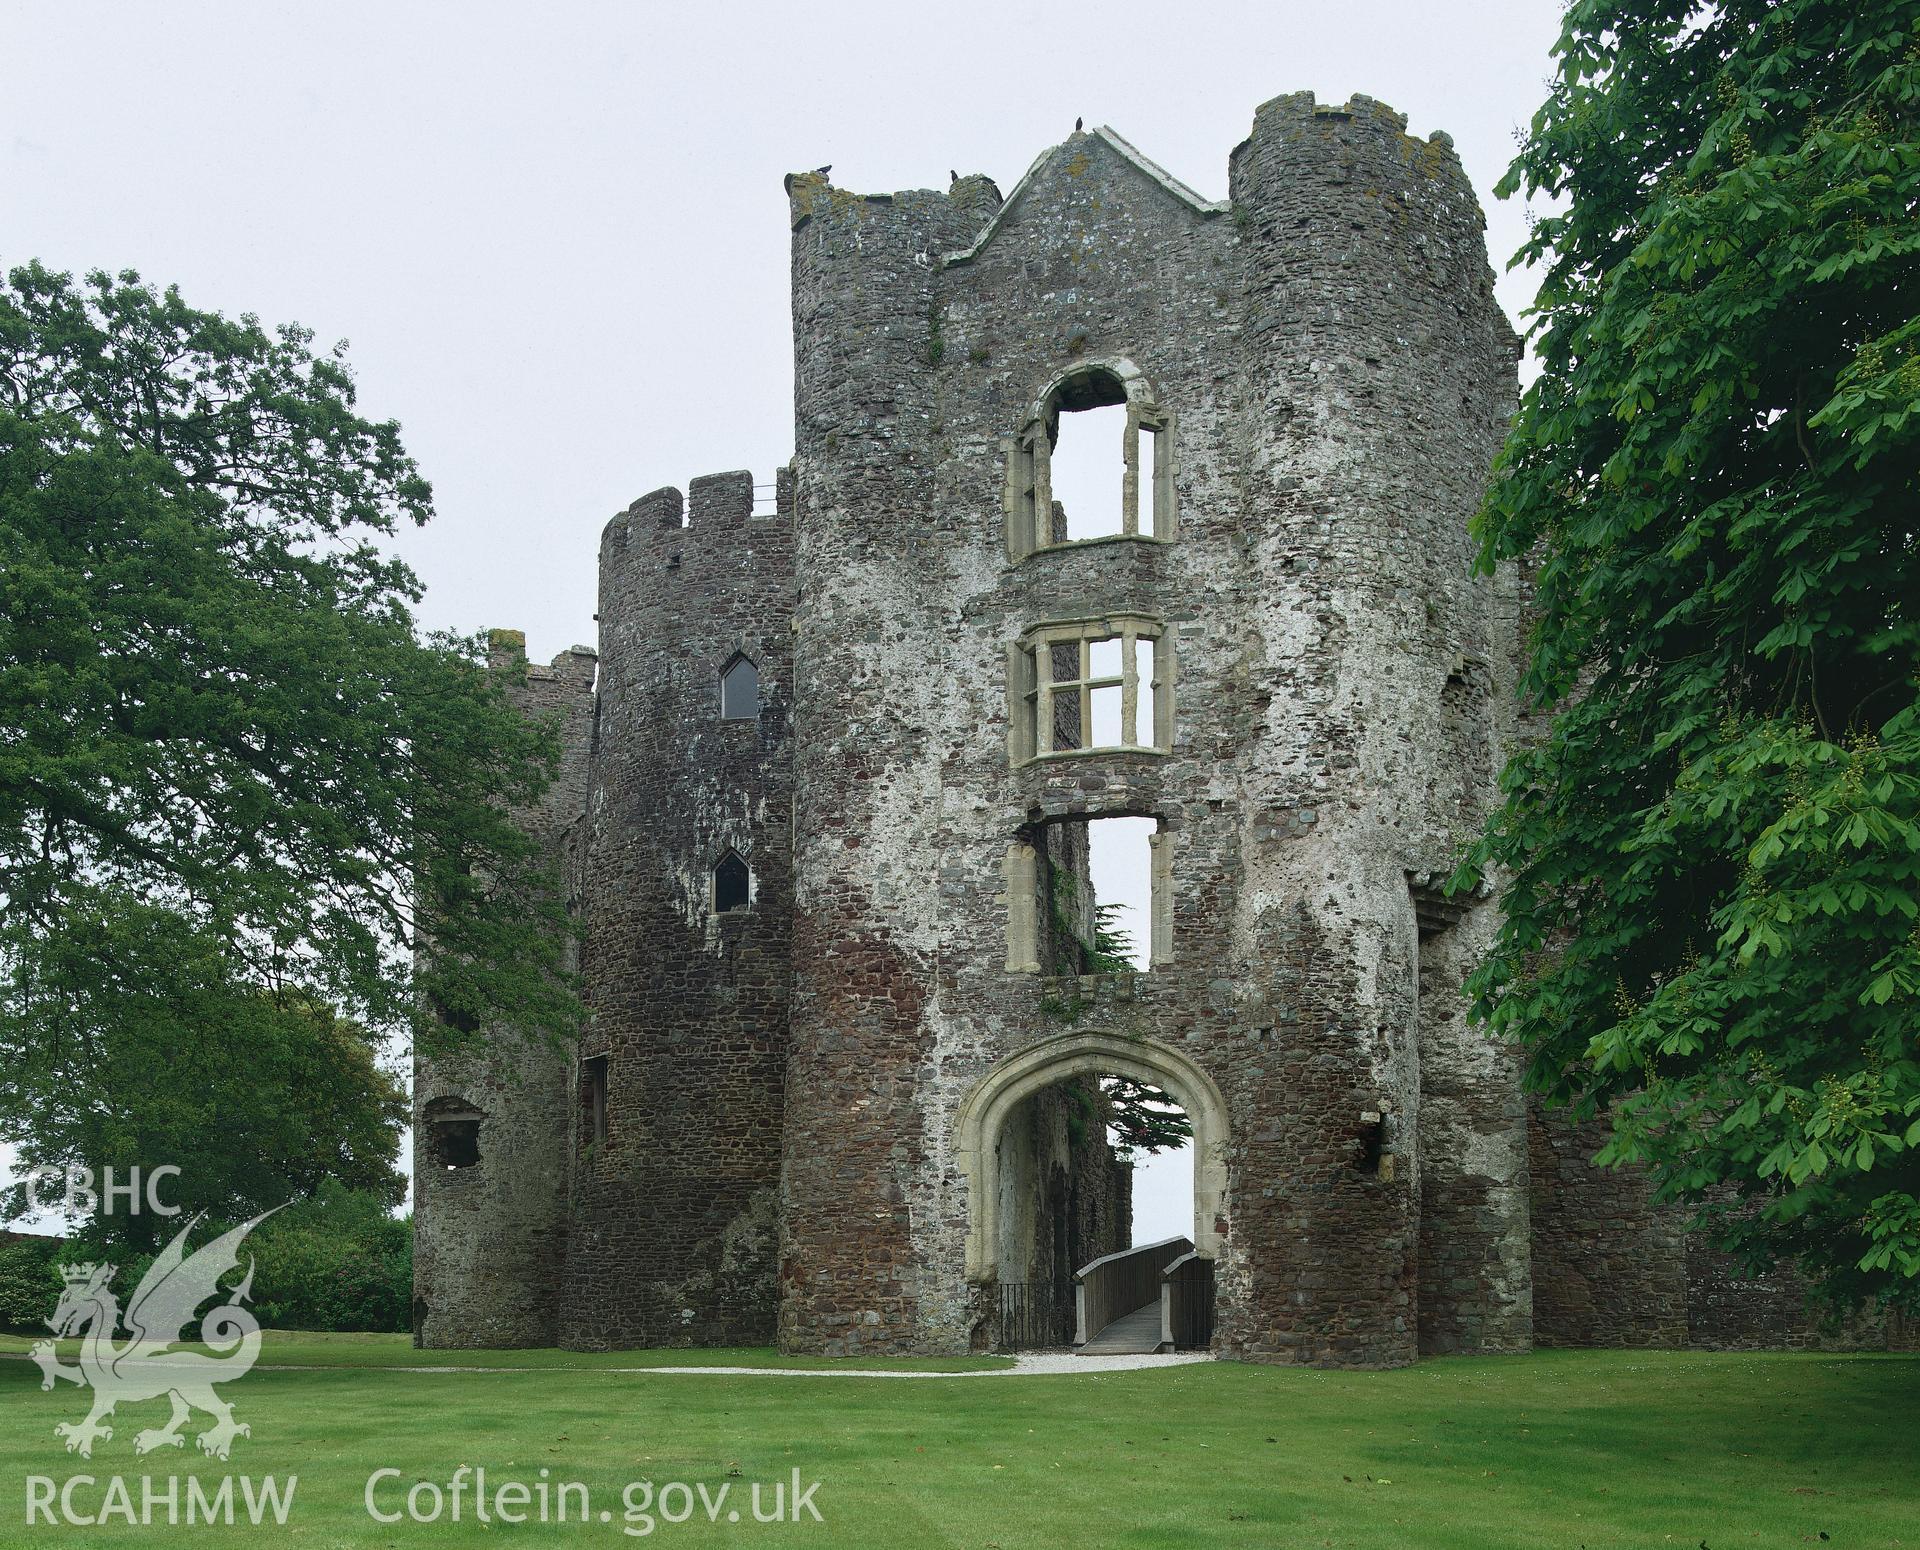 RCAHMW colour transparency showing exterior view of Laugharne Castle.